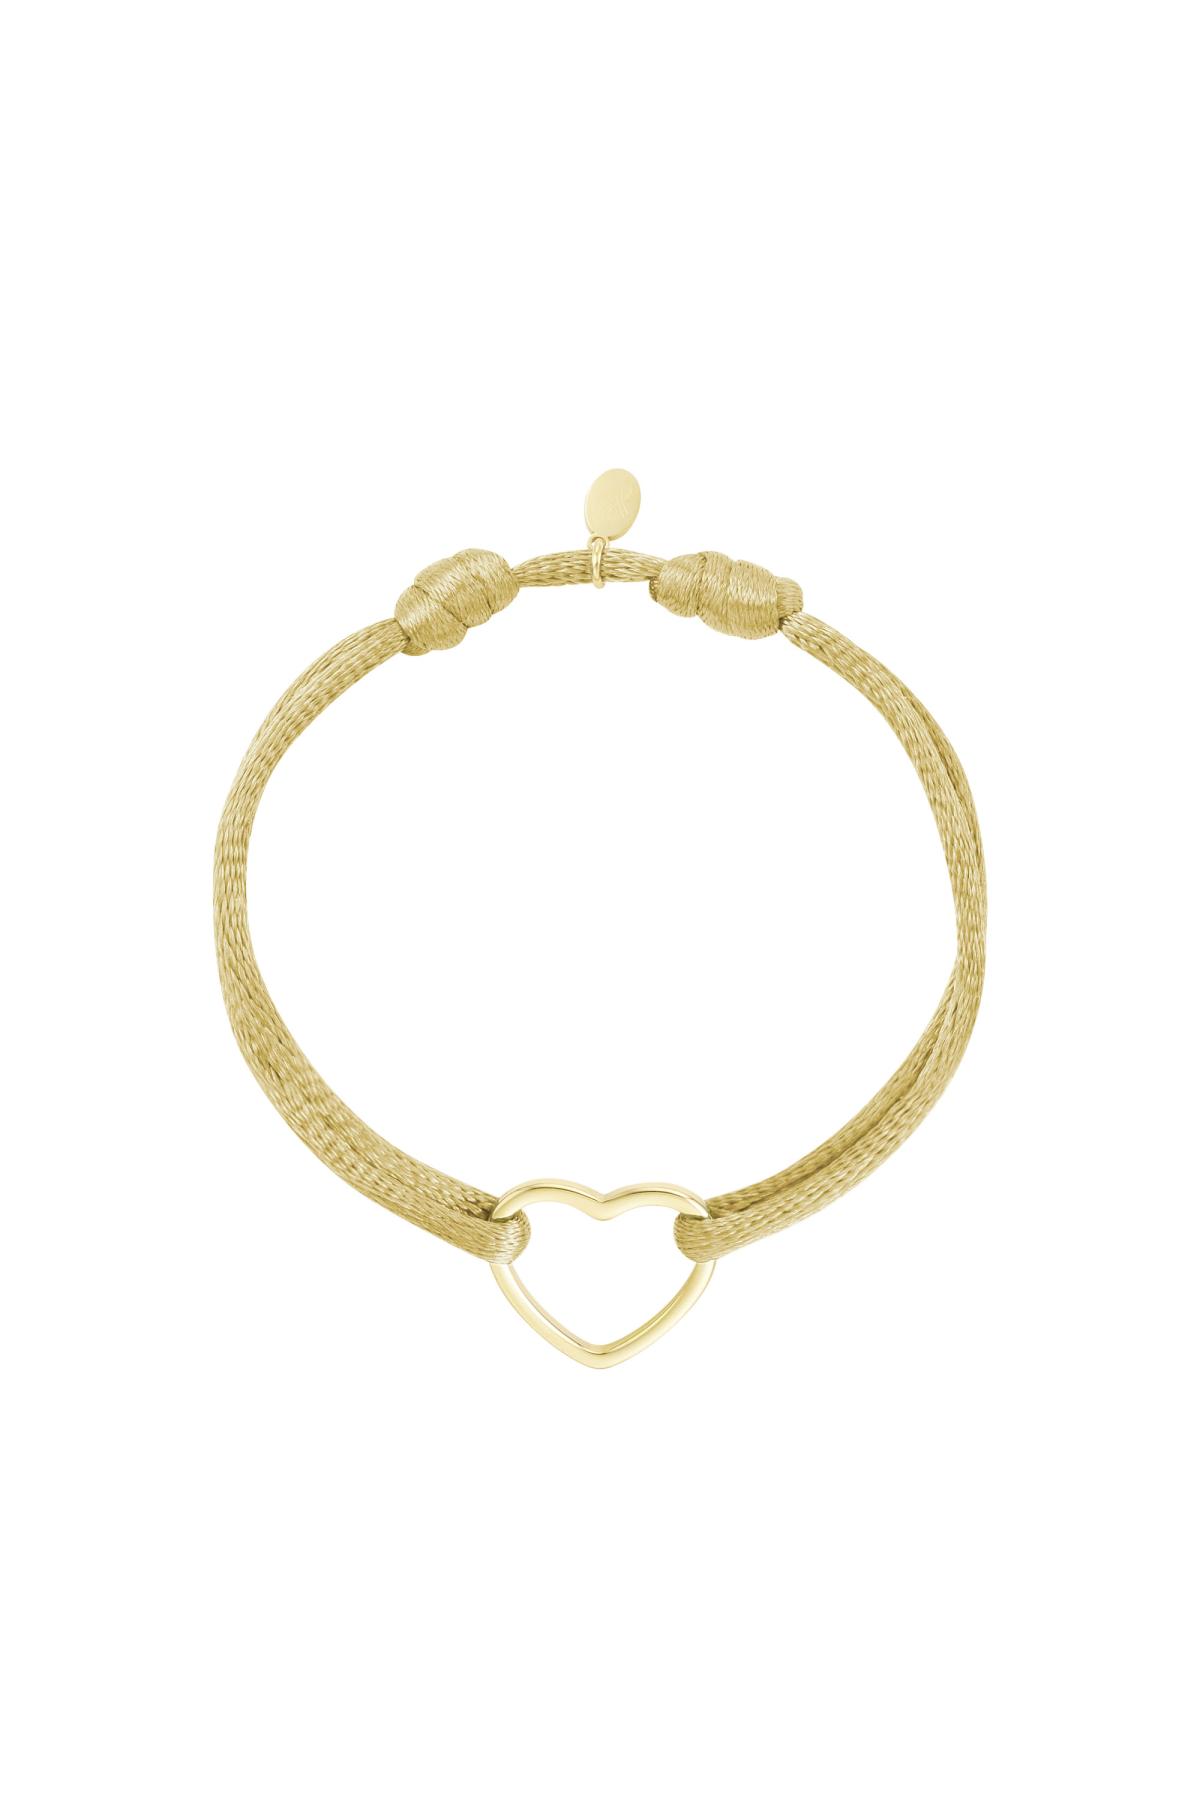 Bracciale in tessuto cuore Beige & Gold Stainless Steel h5 